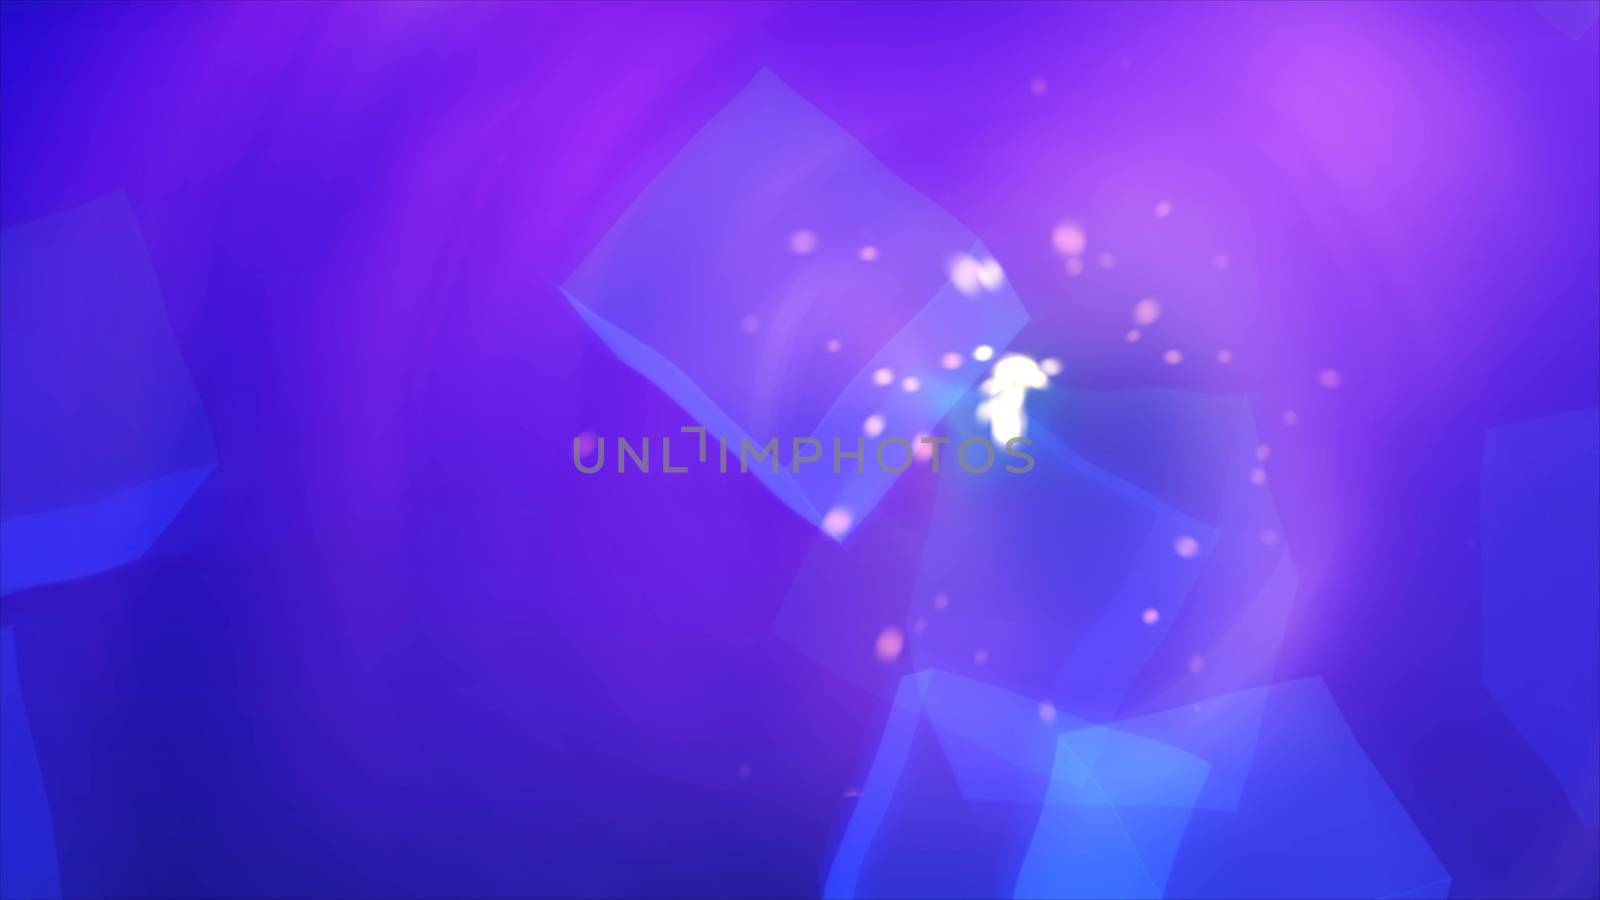 Blue cubis abstraction in the clear space with shiny particles, light and easy background, 3d render backdrop by nolimit046